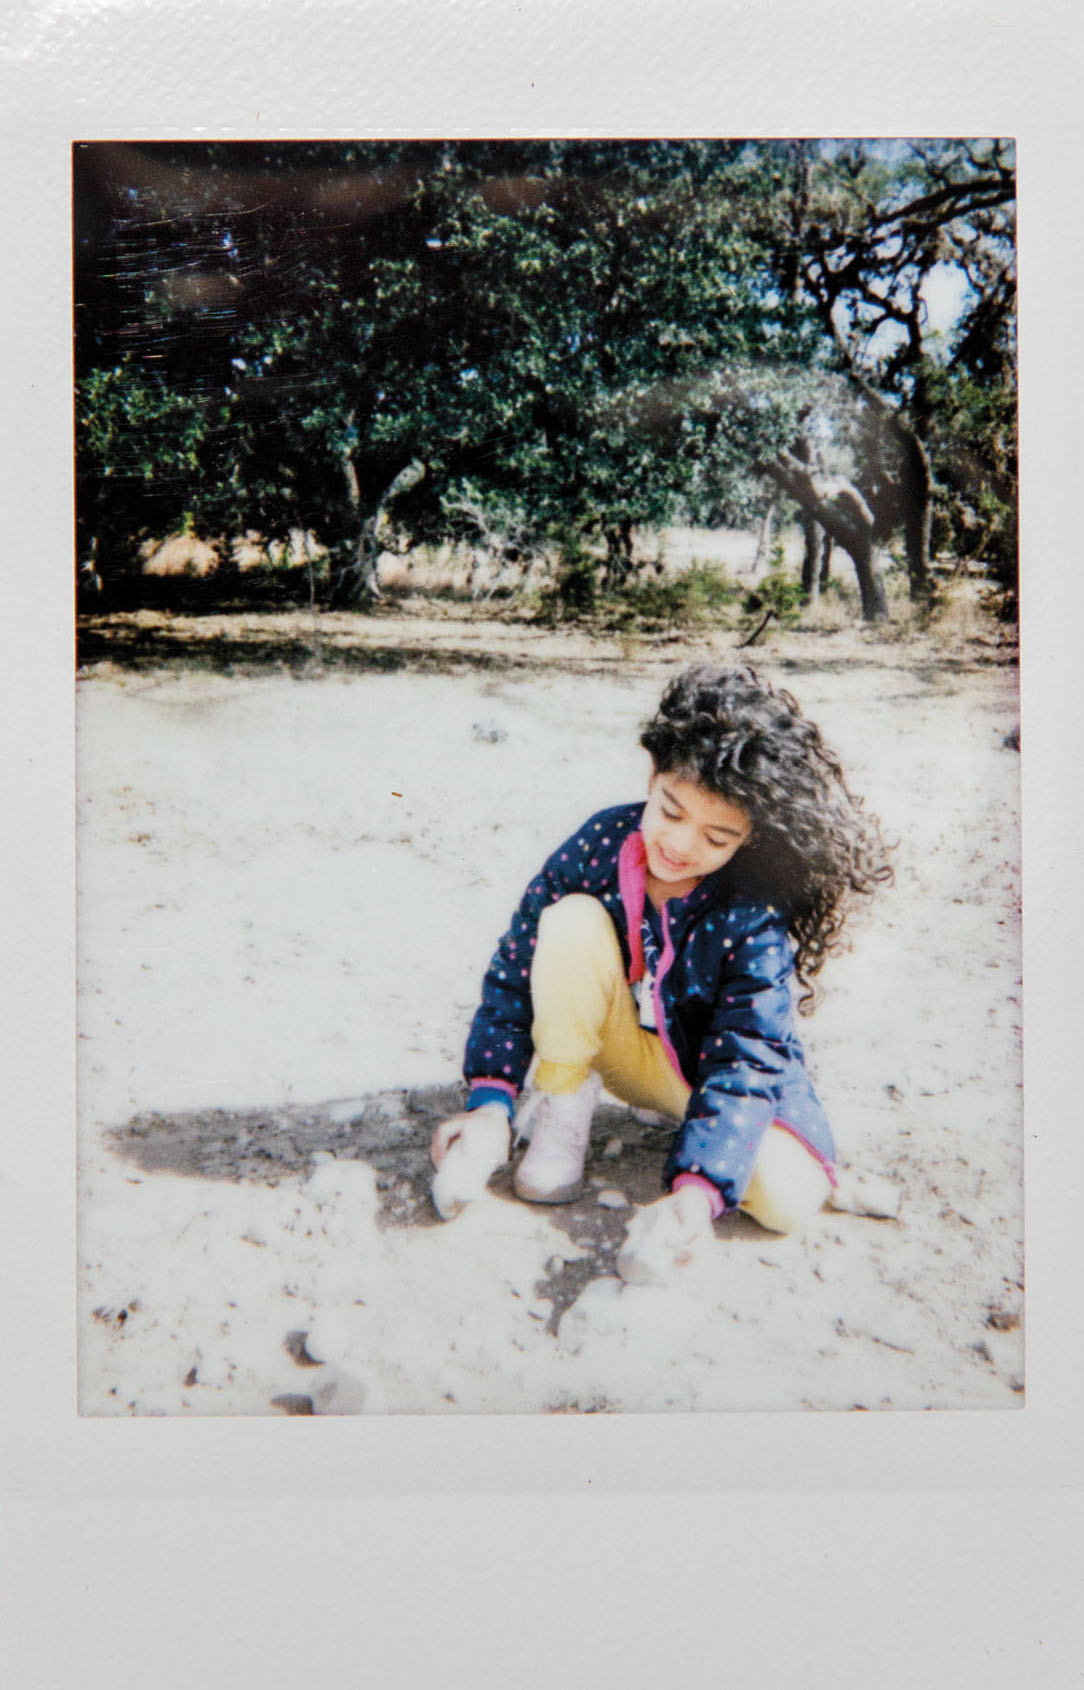 A Polaroid picture of a young woman crushing rocks together underneath a canopy of trees